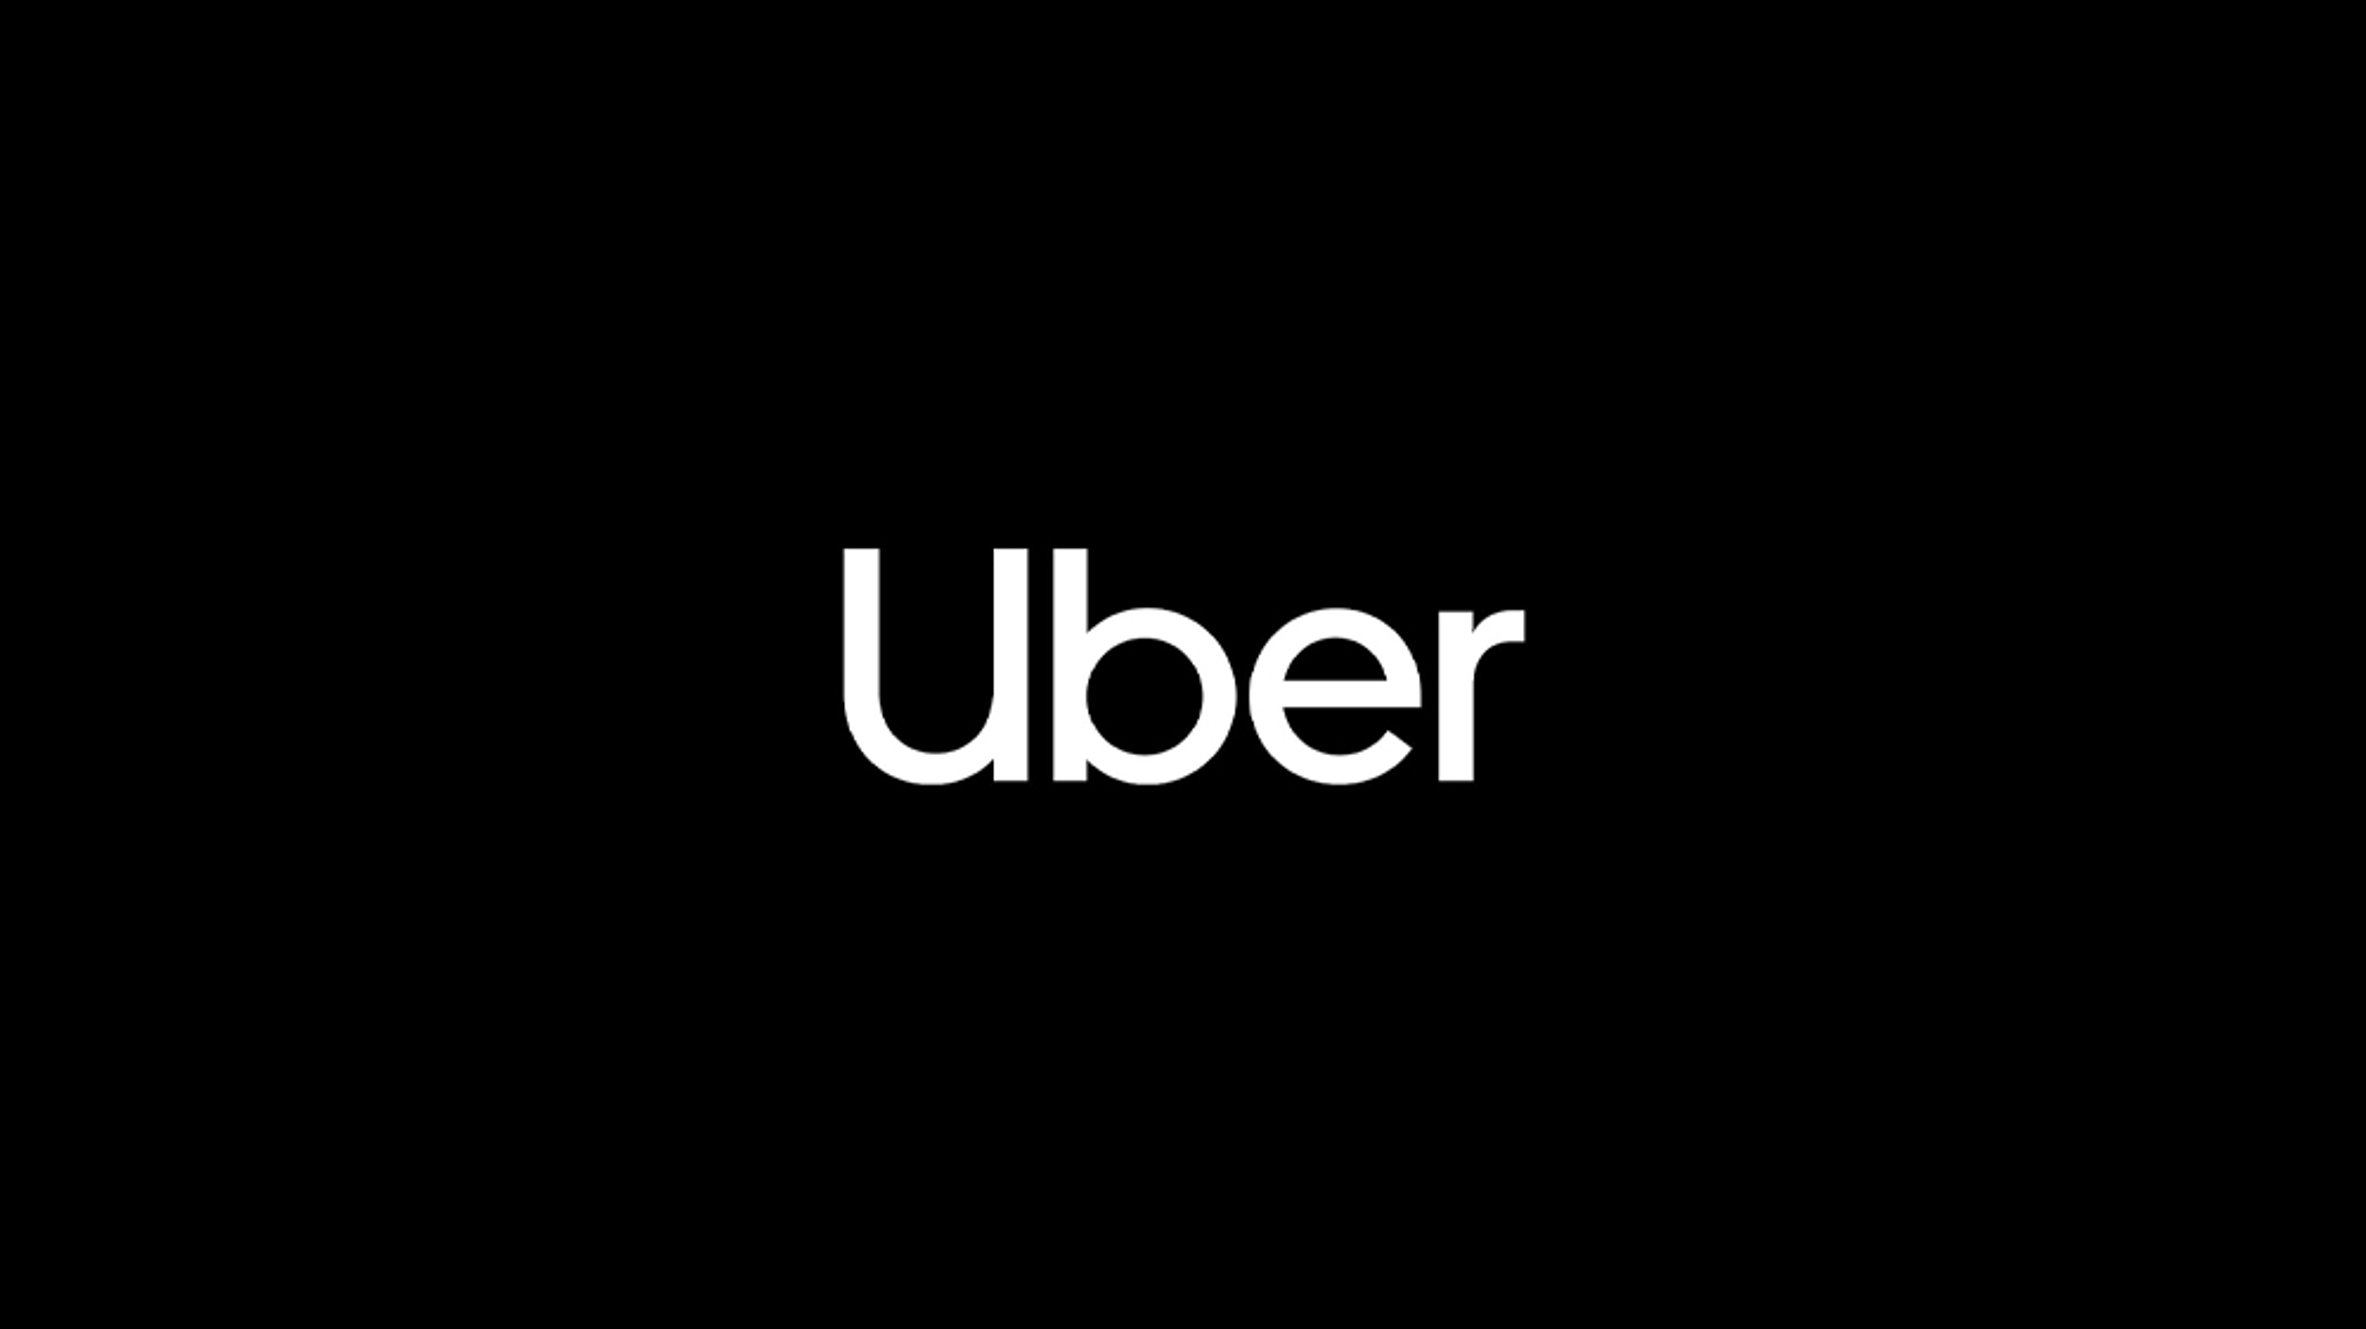 Casting an Uber Commercial!  Seeking Uber drivers, riders and passengers in Sydney, Australia.